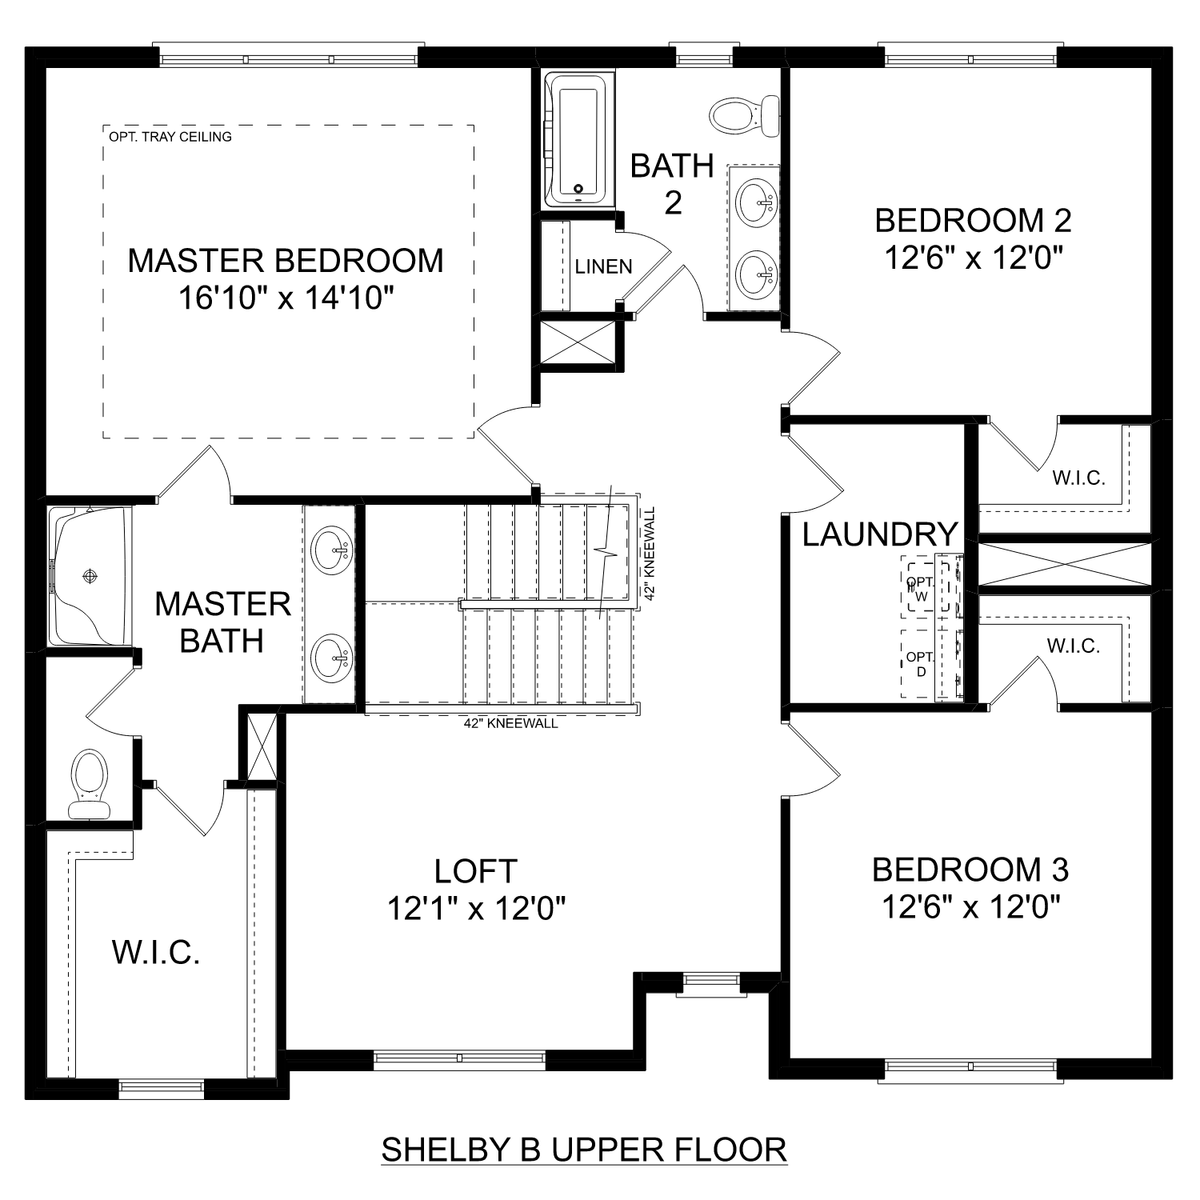 2 - The Shelby B floor plan layout for 9240 Current Way in Davidson Homes' Watts Glen community.